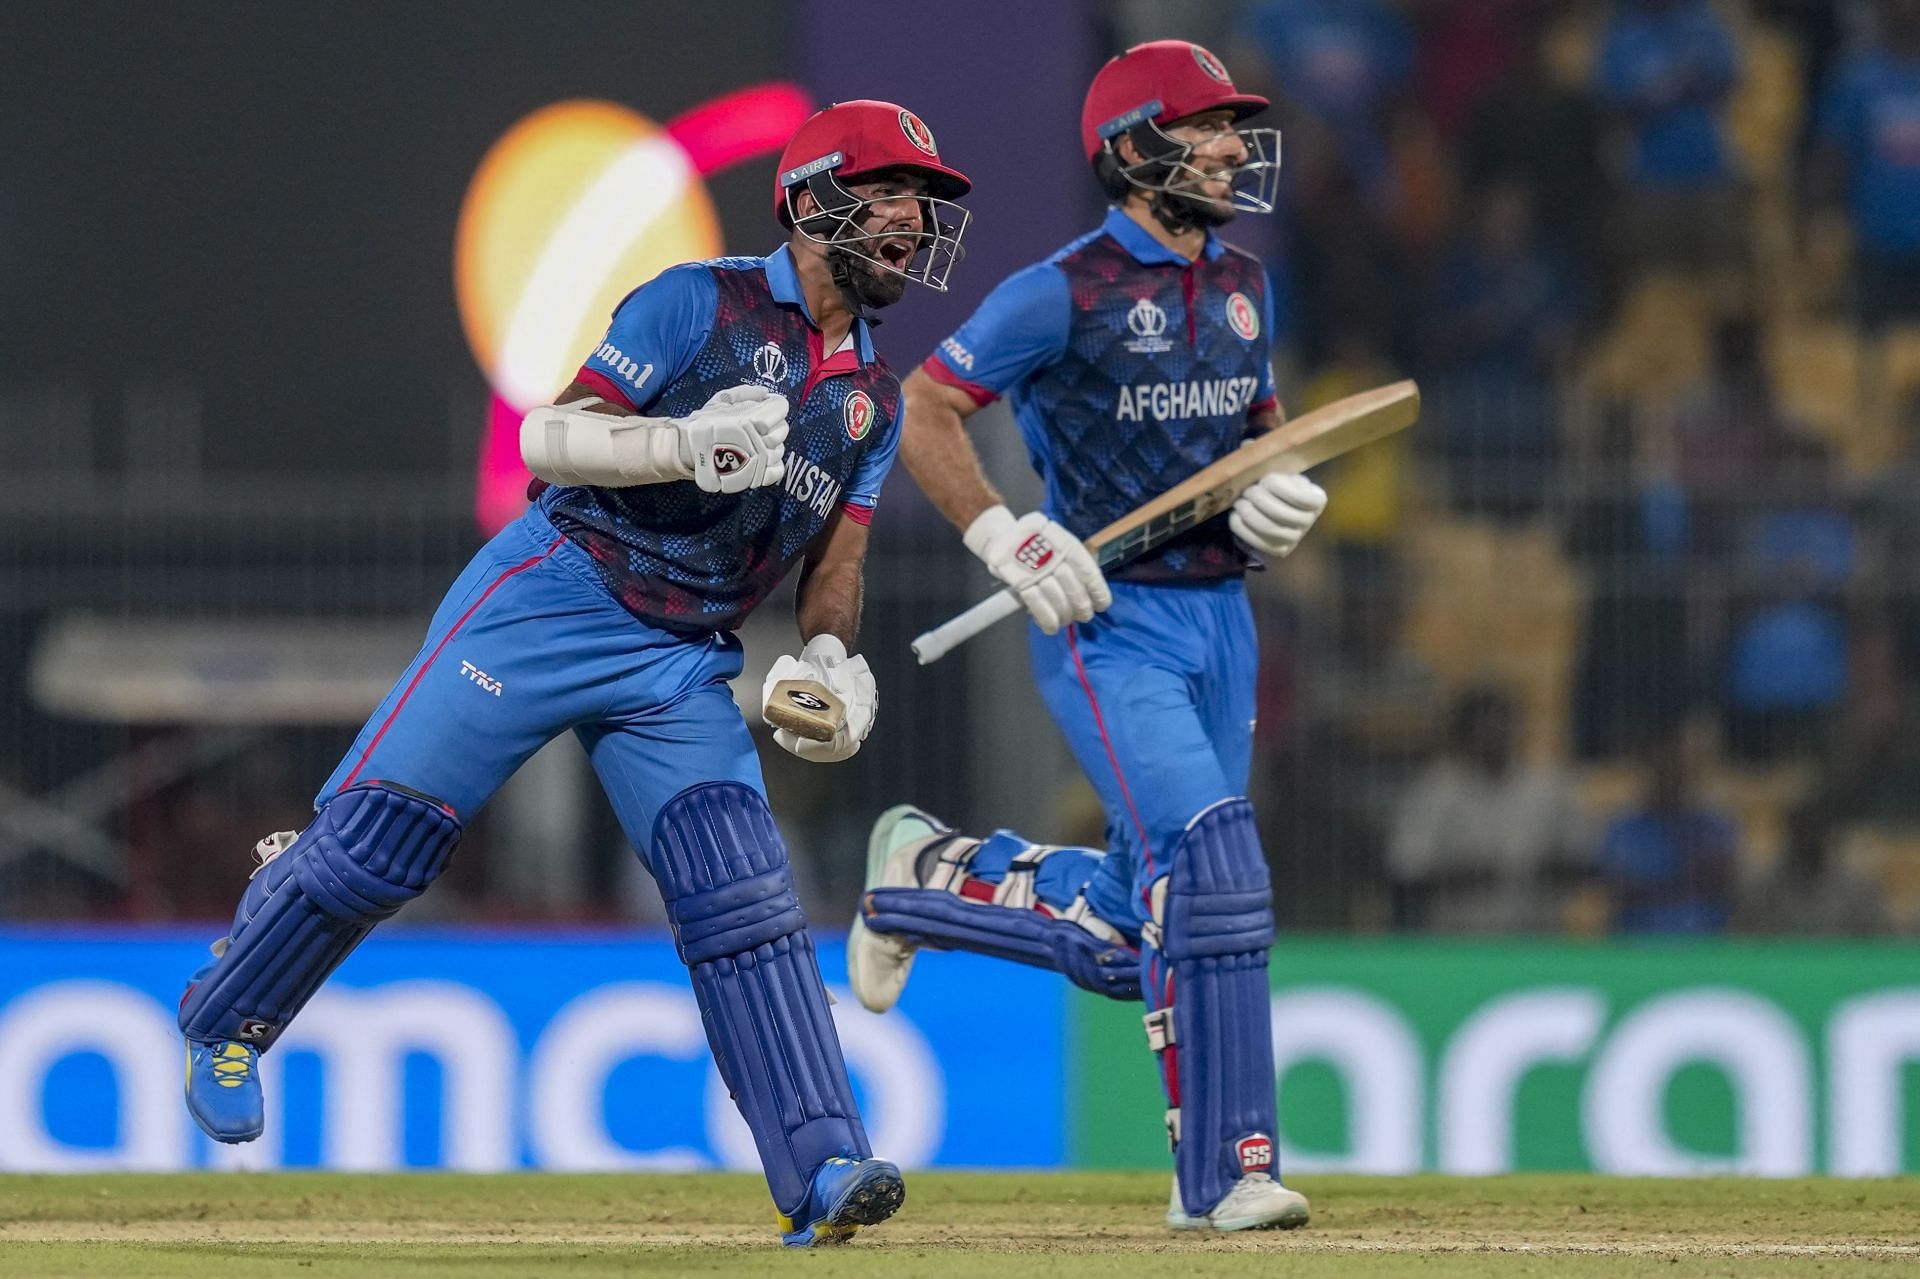 Afghanistan jumped to sixth spot in the points table after their win against Pakistan. [P/C: AP]